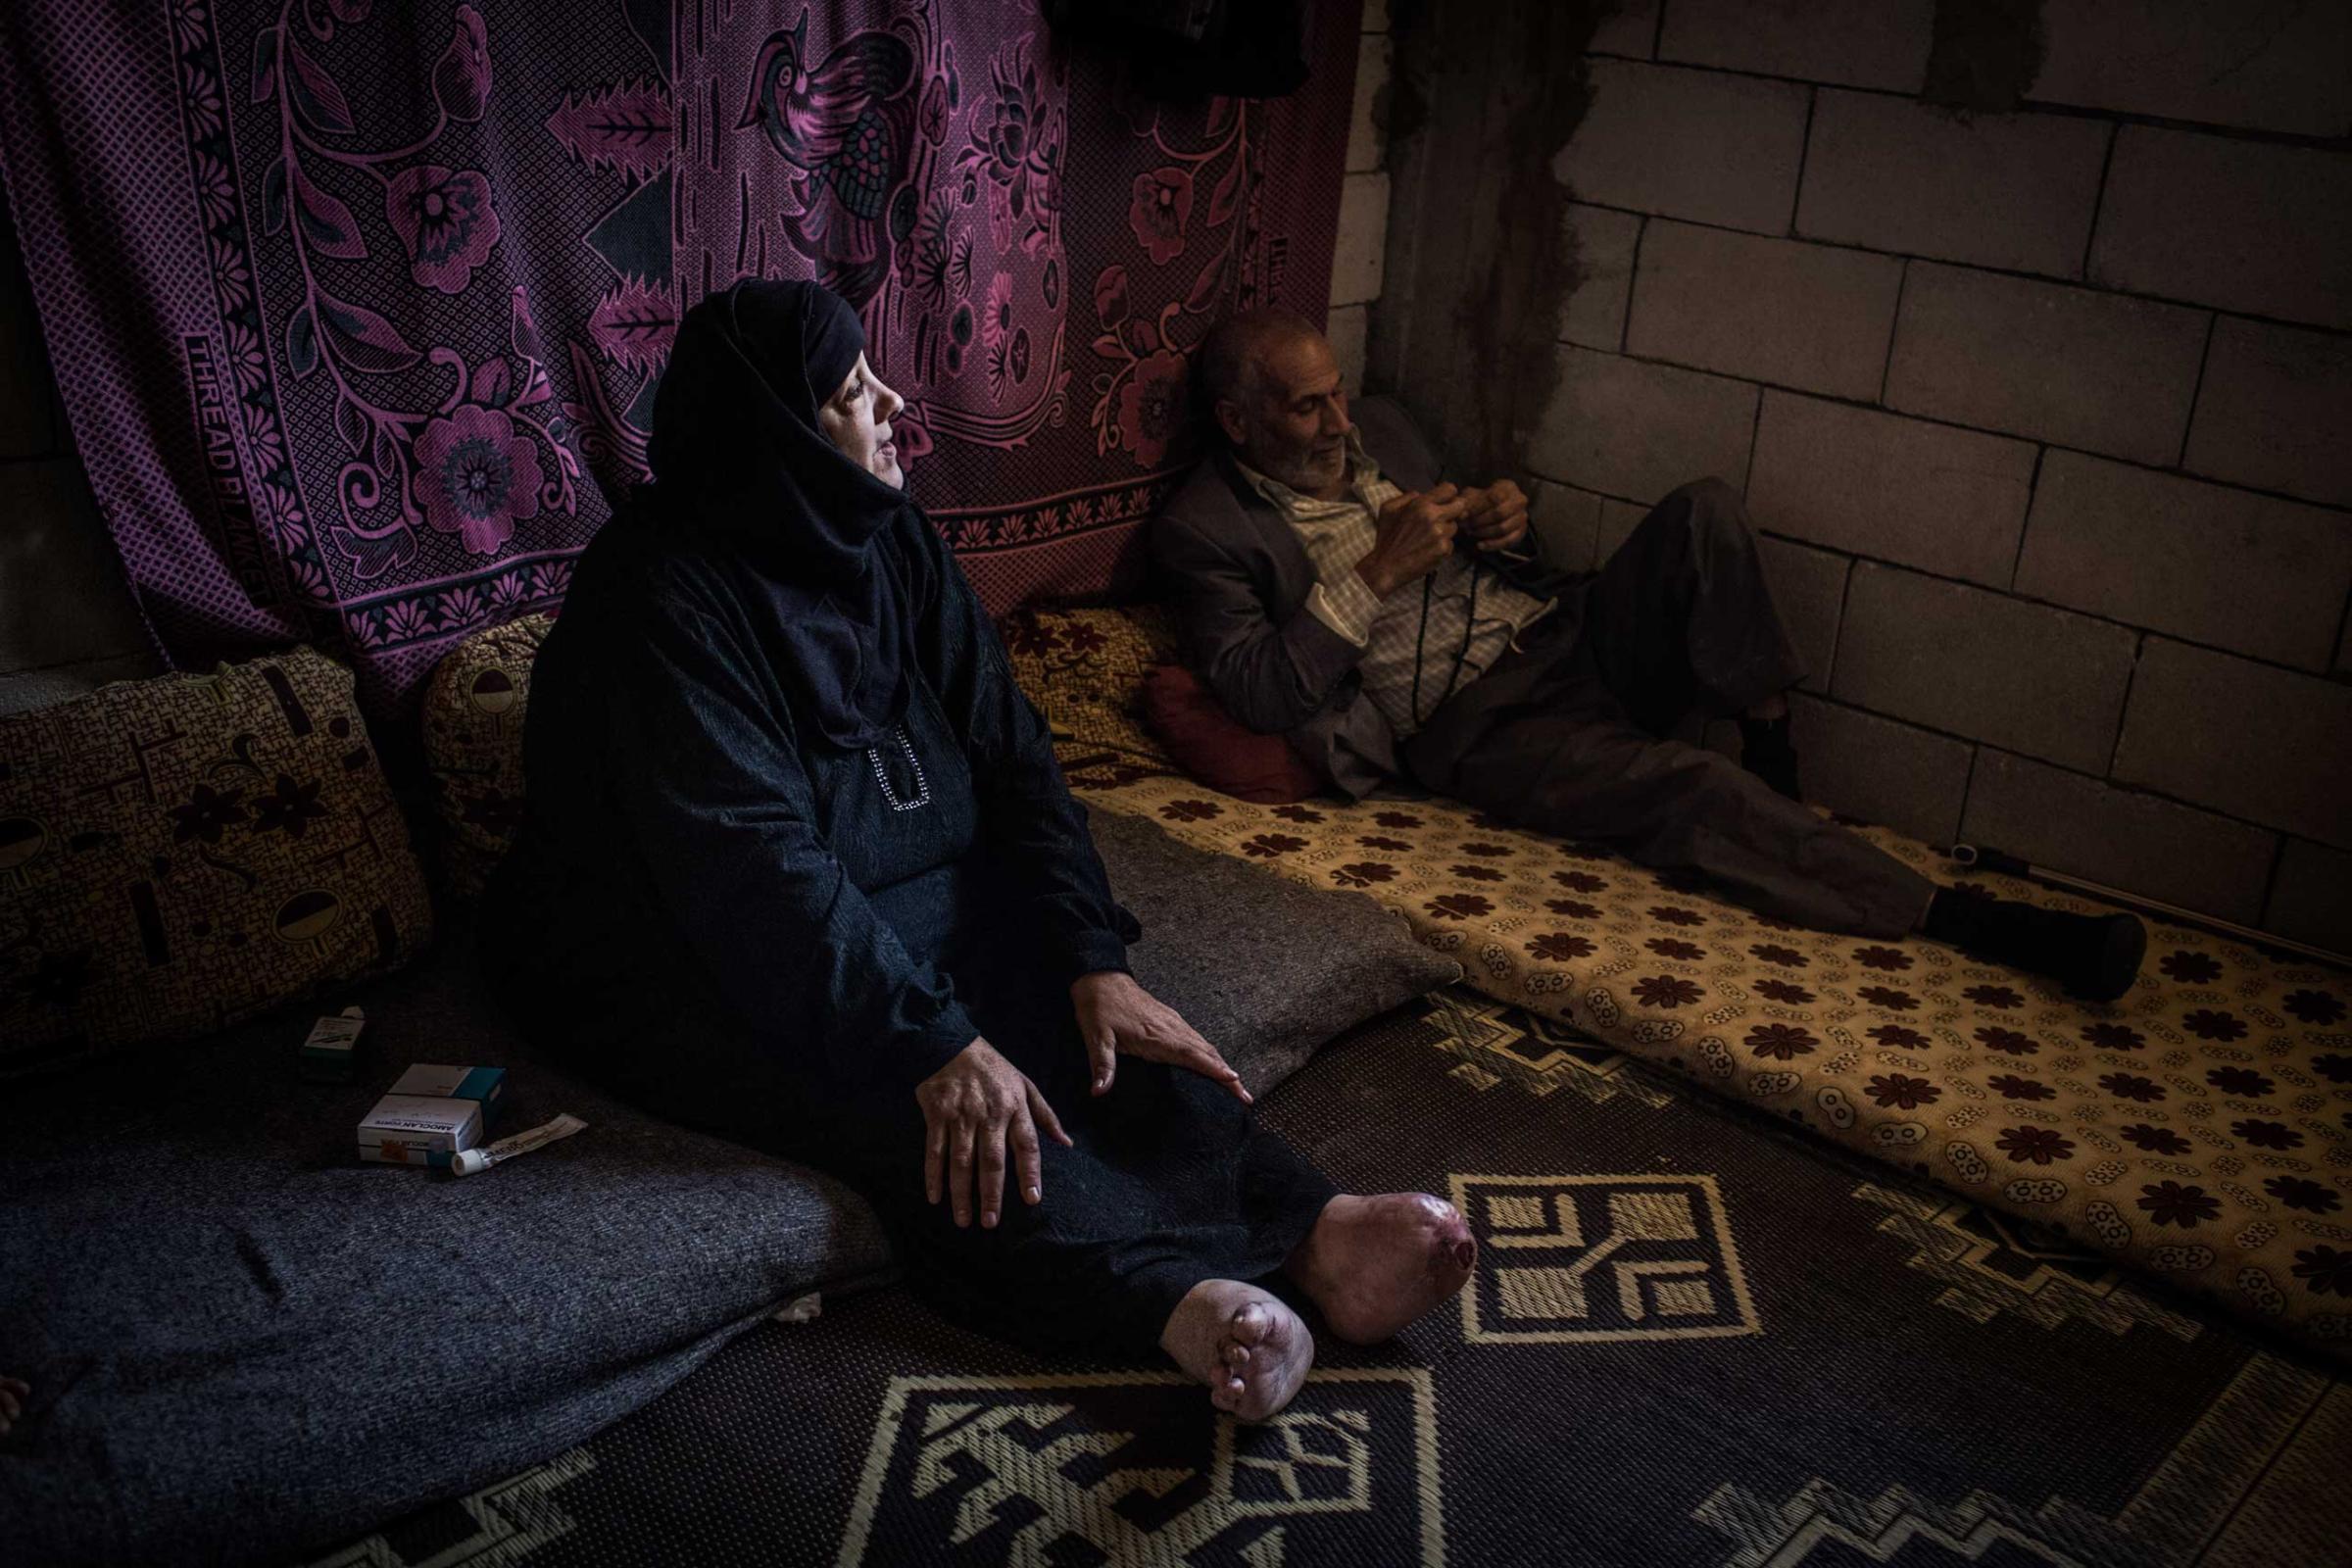 Sabah, 57, at home in the Bekaa Valley, Lebanon, June 26, 2014. Sabah, who has diabetes, was home when a neighbor’s house was bombed. Several toes were amputated after a glass wound: “I haven't walked in two years."